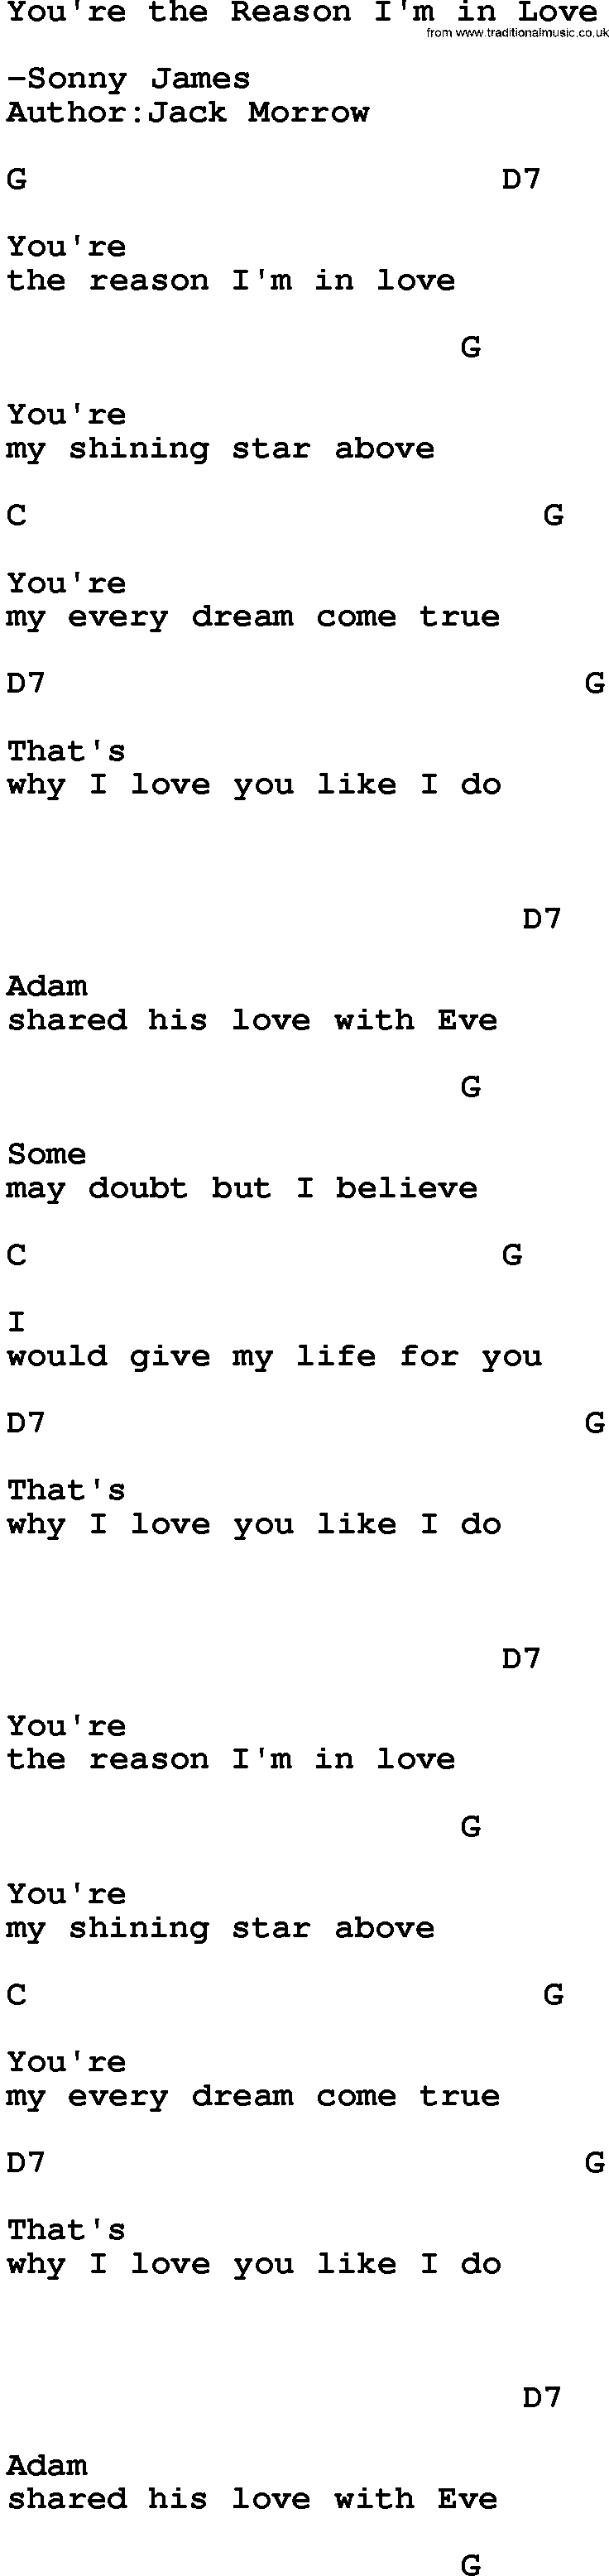 Country music song: You're The Reason I'm In Love lyrics and chords